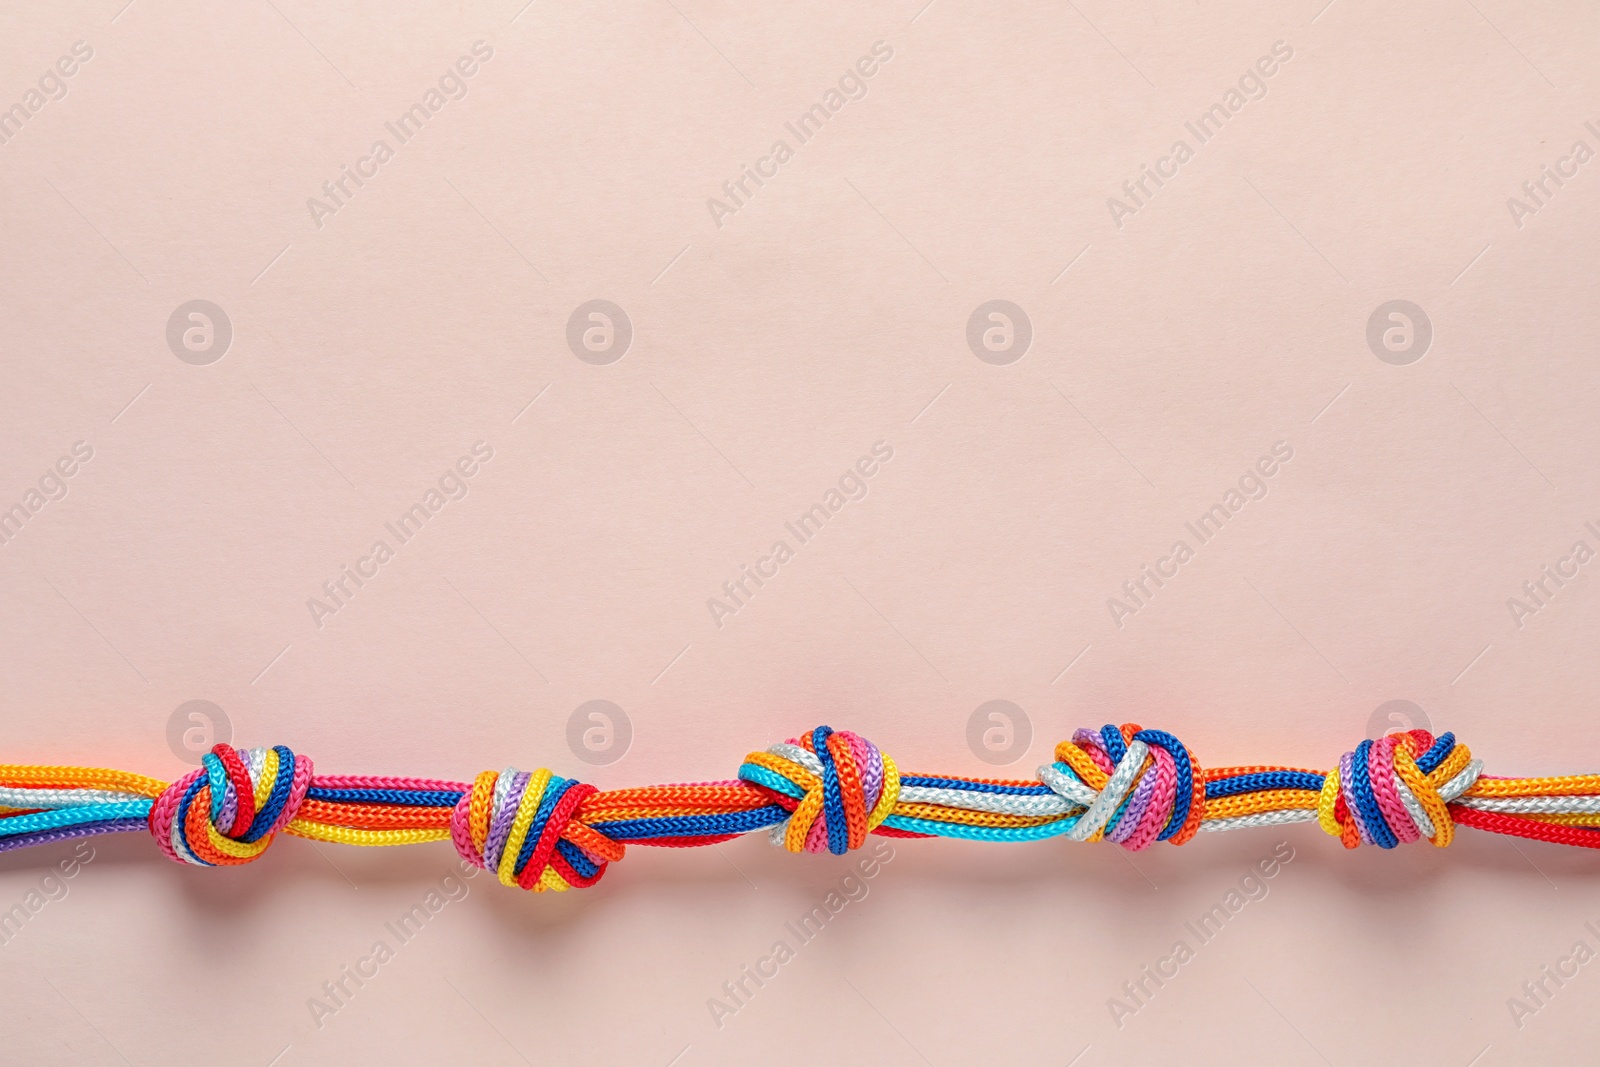 Photo of Colorful ropes tied together with many knots on light background, top view. Unity concept